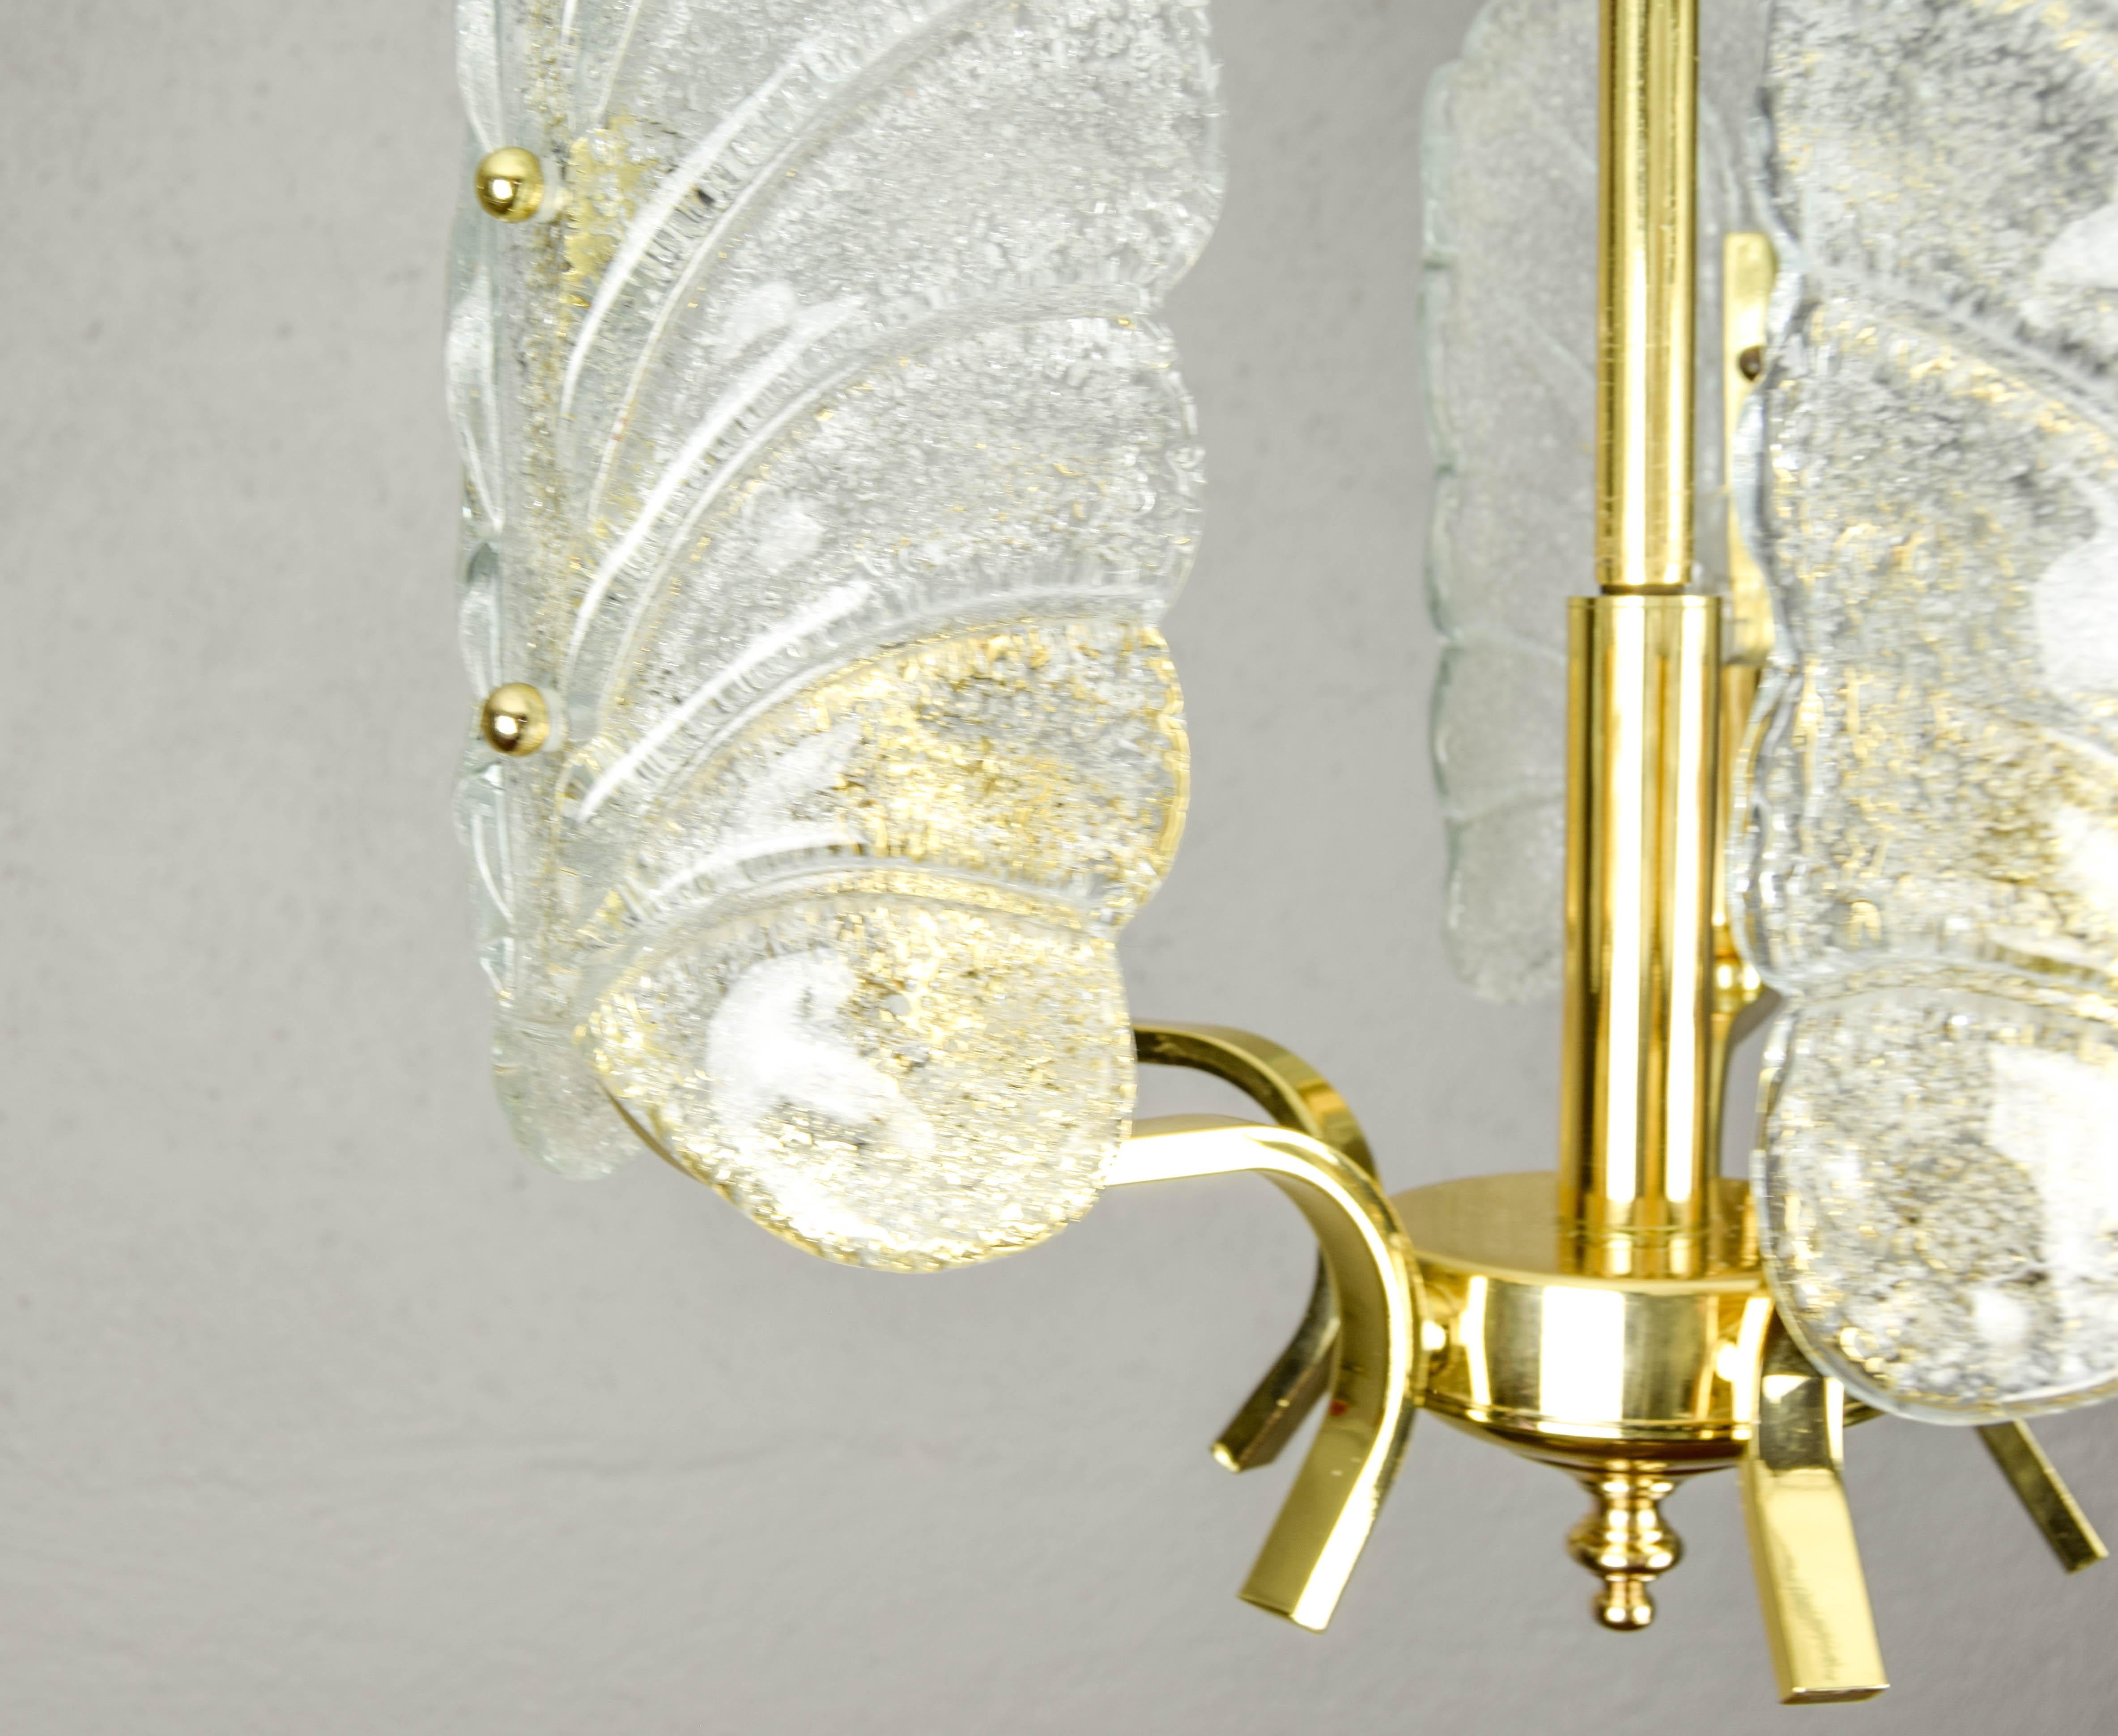 Frosted Carl Fagerlund Glass Leaves and Golden Steel Chandelier by Orrefors, Sweden 1960